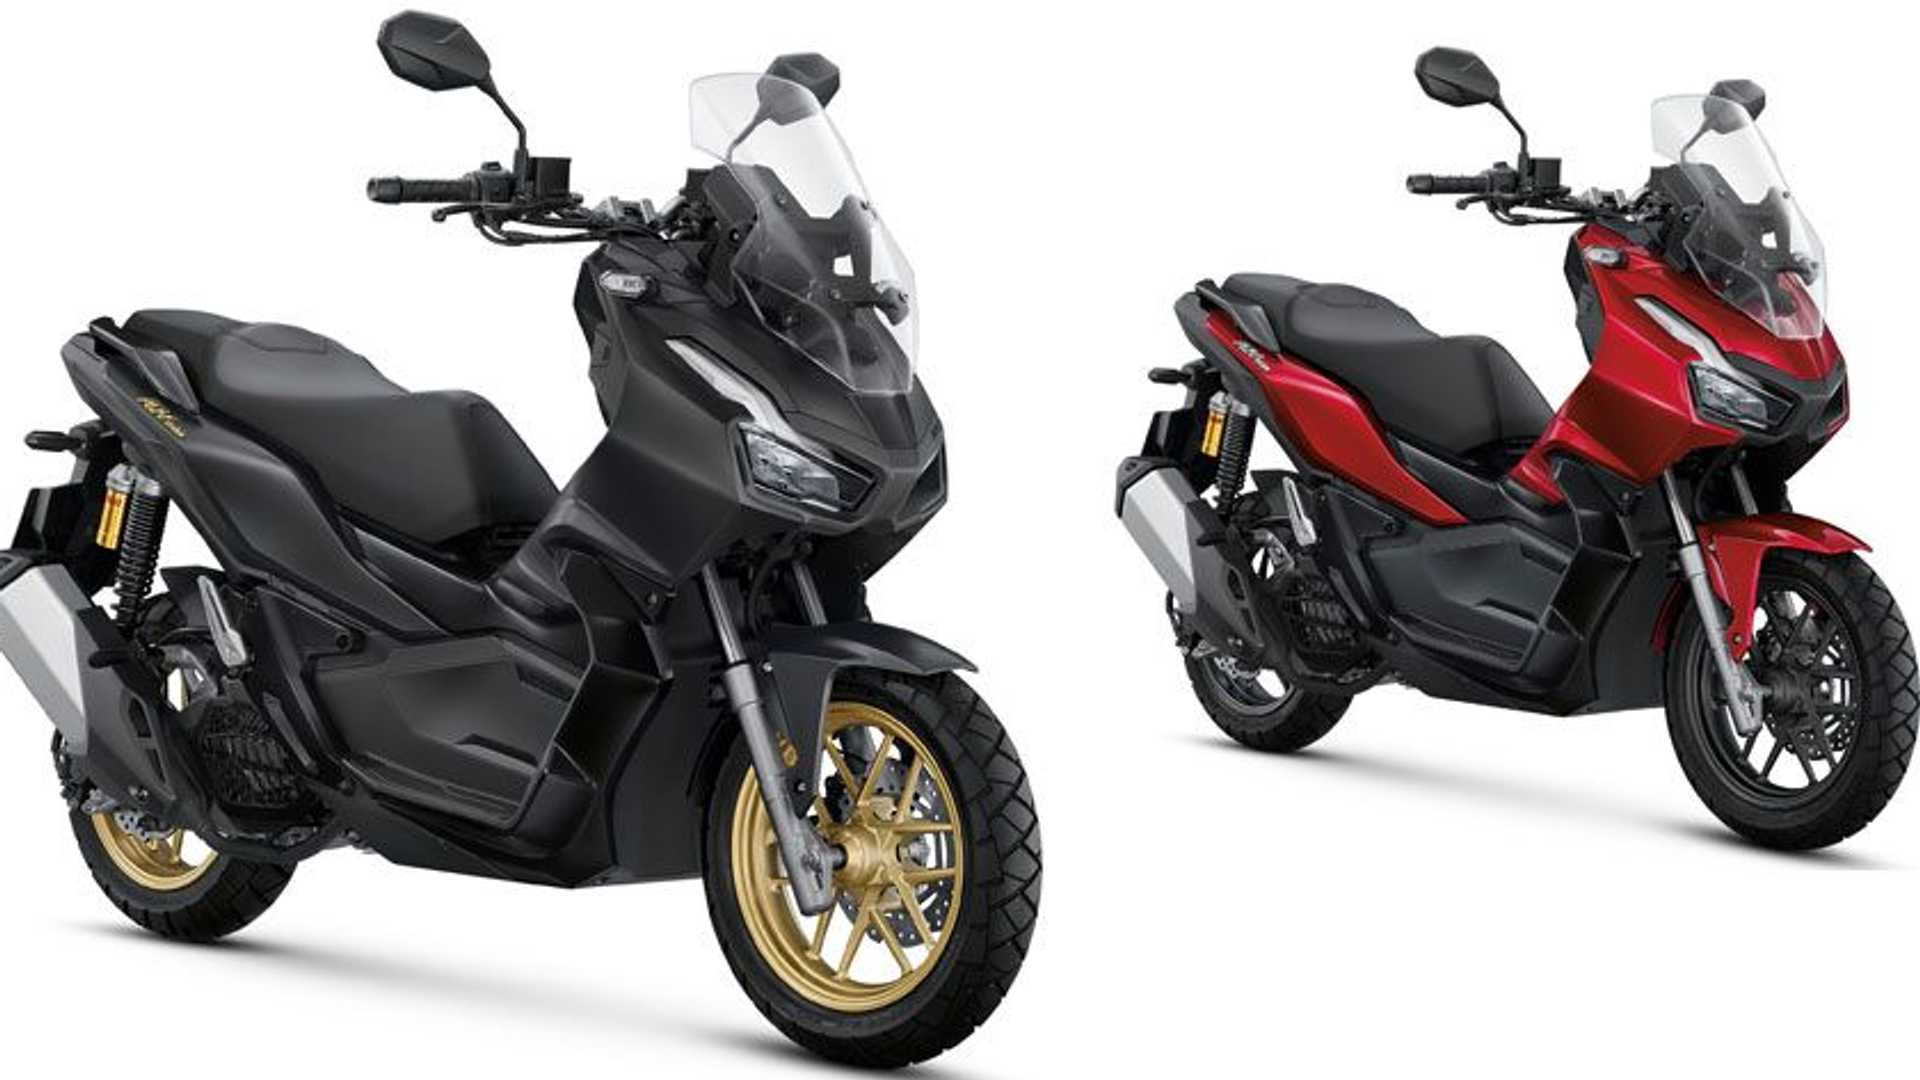 Honda Rolls Out The New ADV 160 In The Asian Market